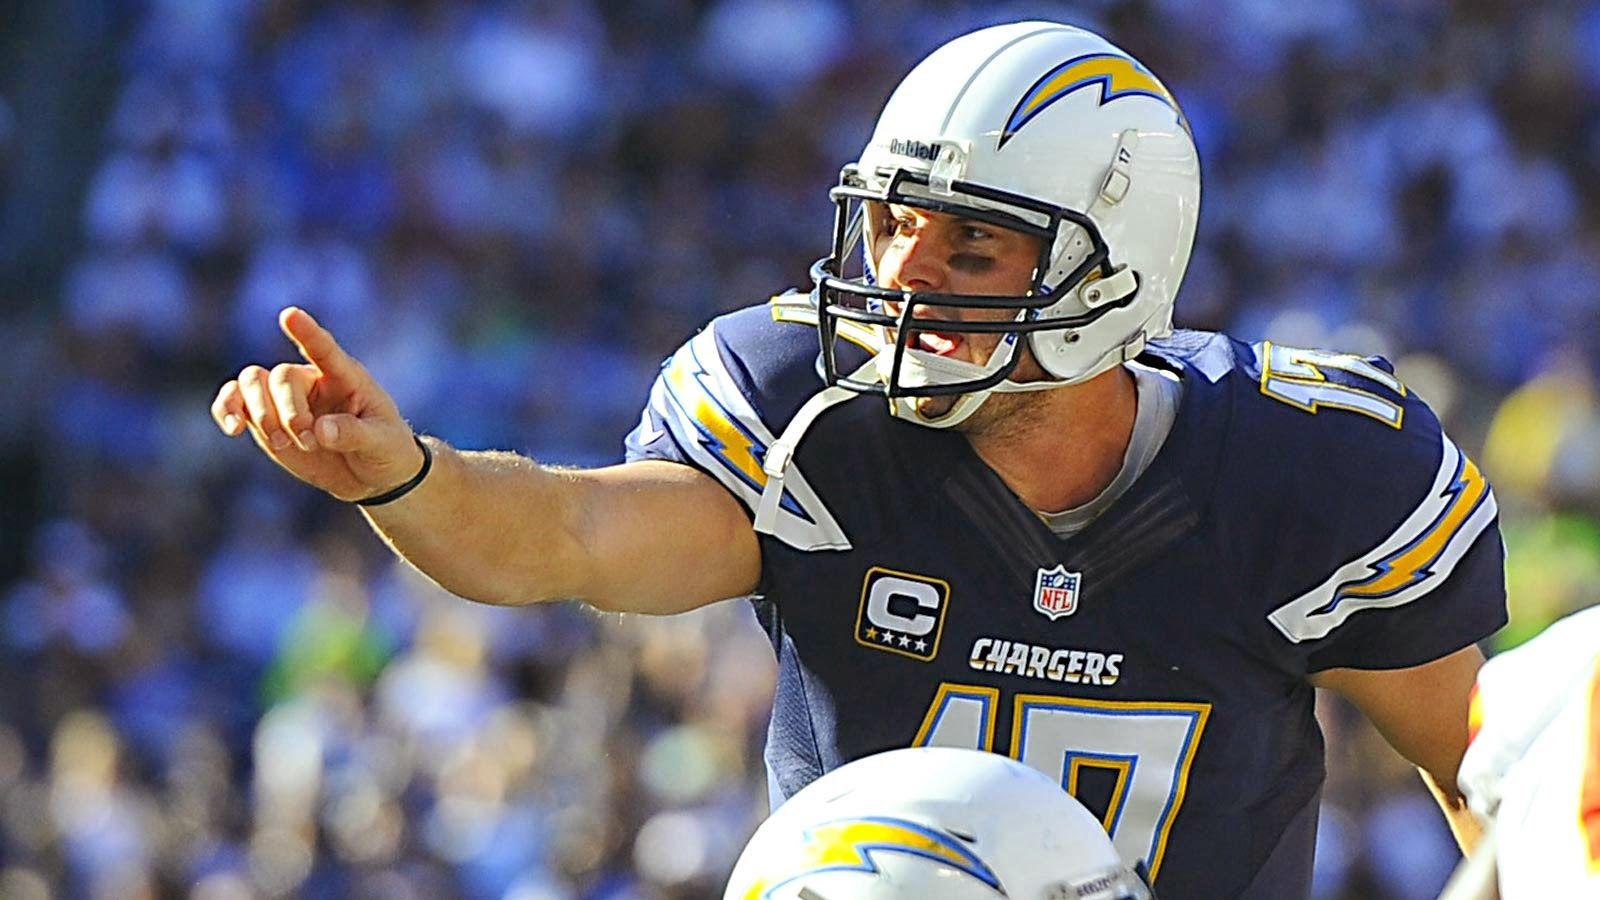 Philip Rivers cranks up his game in the final four